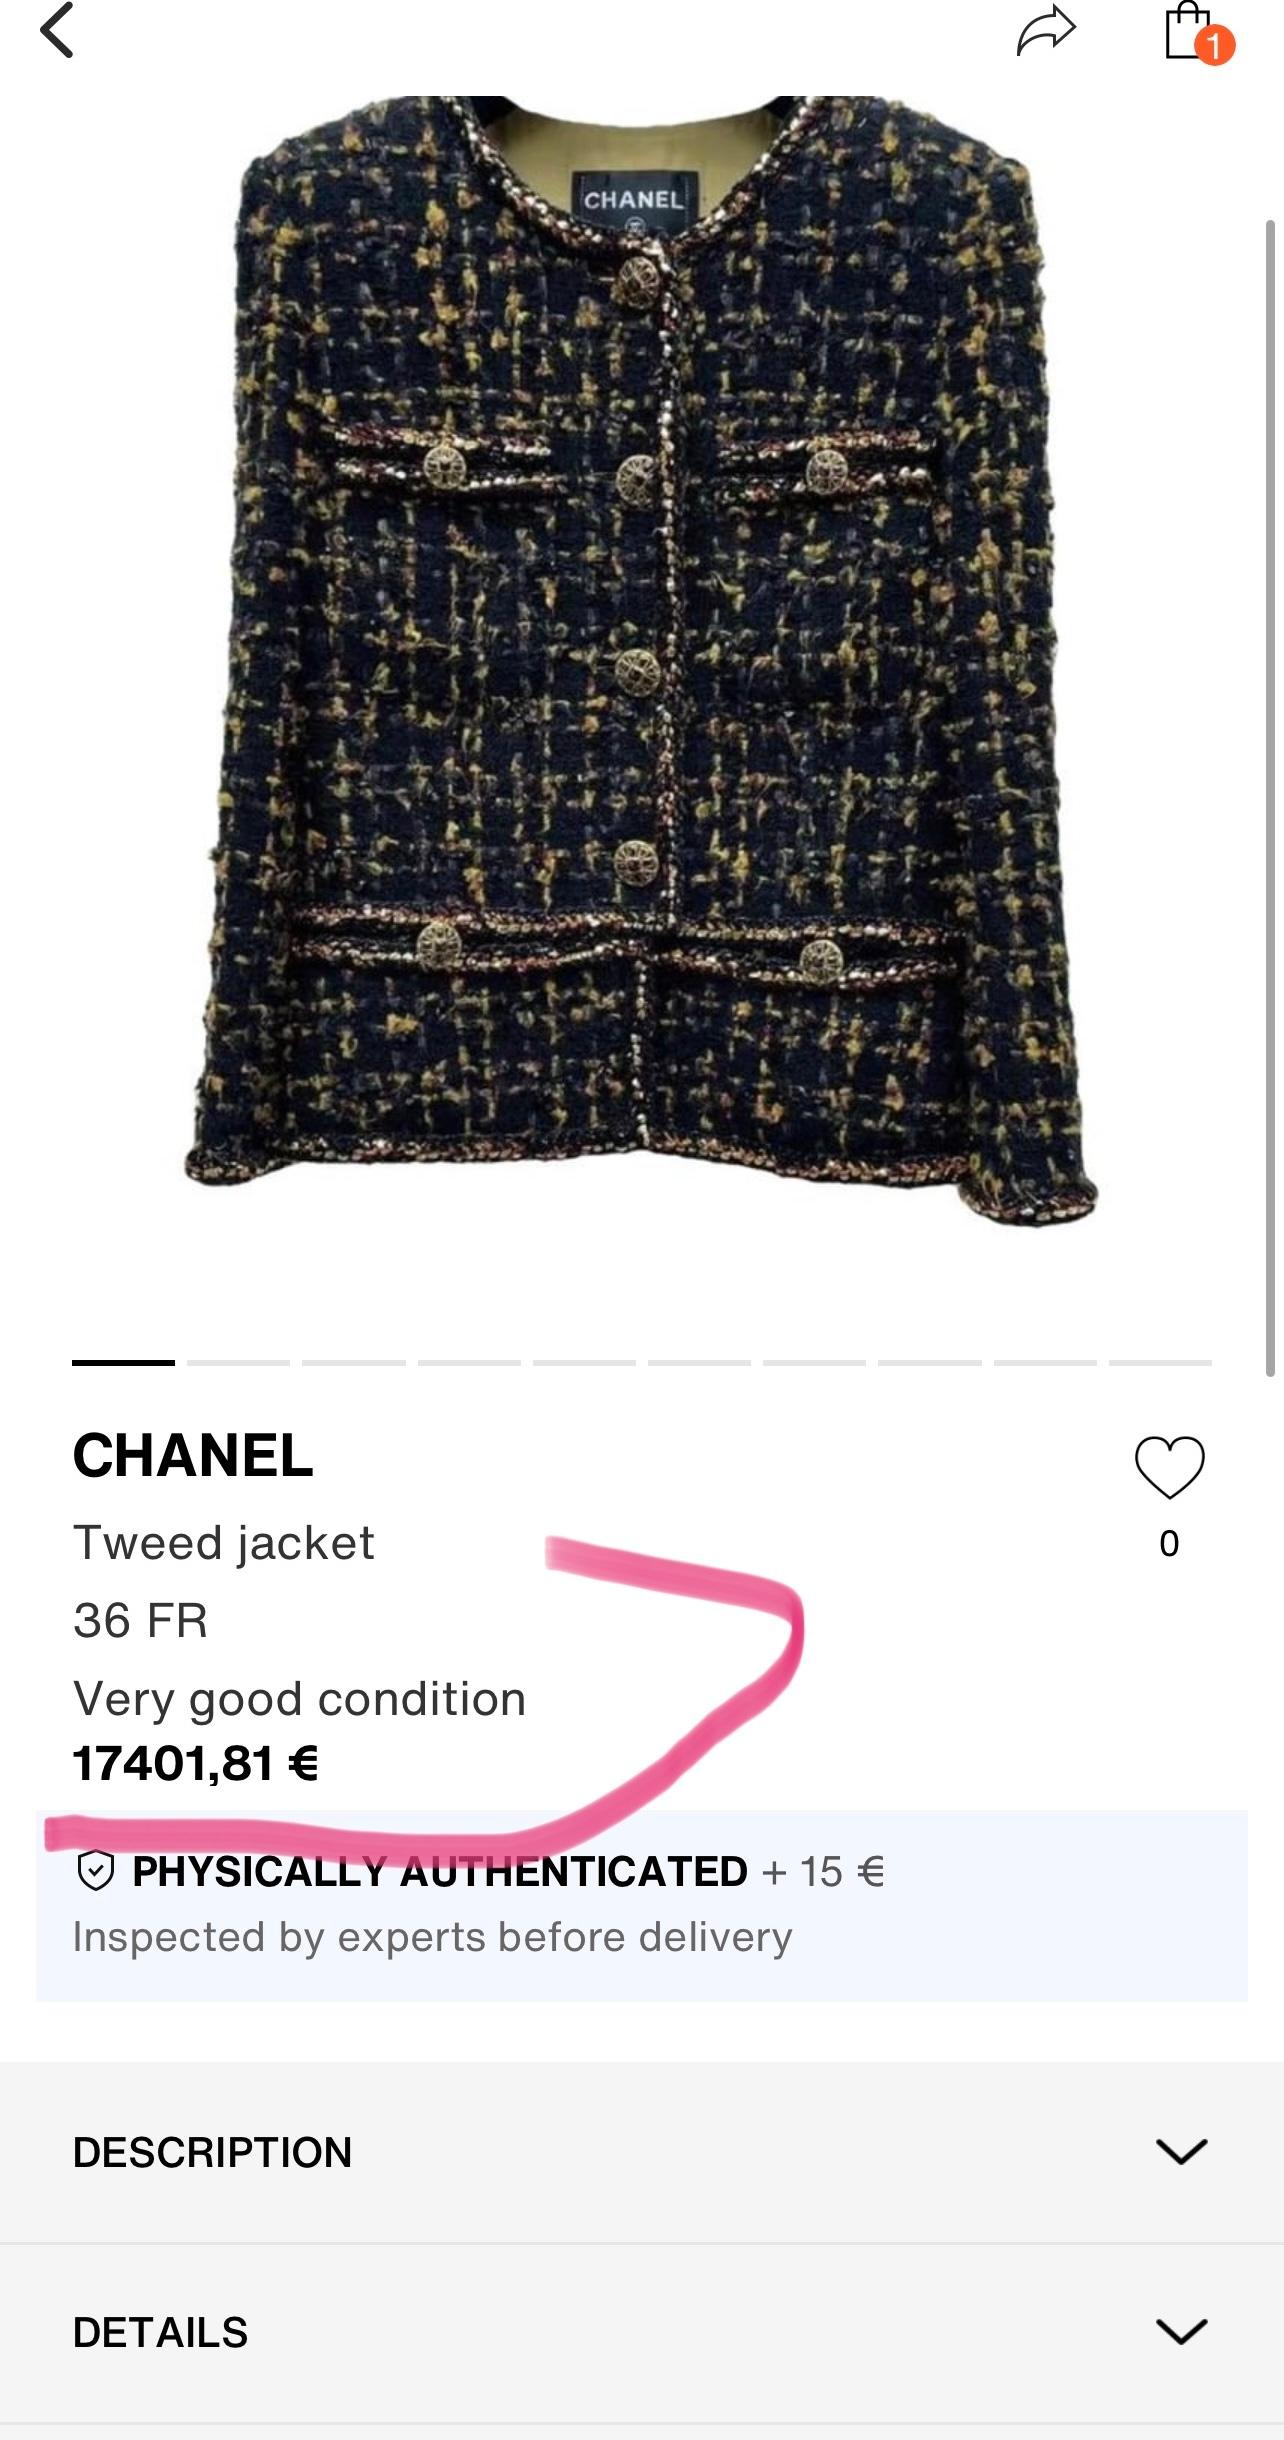 Most hunted black tweed jacket Chanel from Paris / EGYPT 2019 Pre-Fall Metiers d'Art Collection
Price on other source are extremely high!
Size mark 42 FR. Never worn!
- CC logo jewel Gripoix buttons
- signature braided metallic trim
- full silk